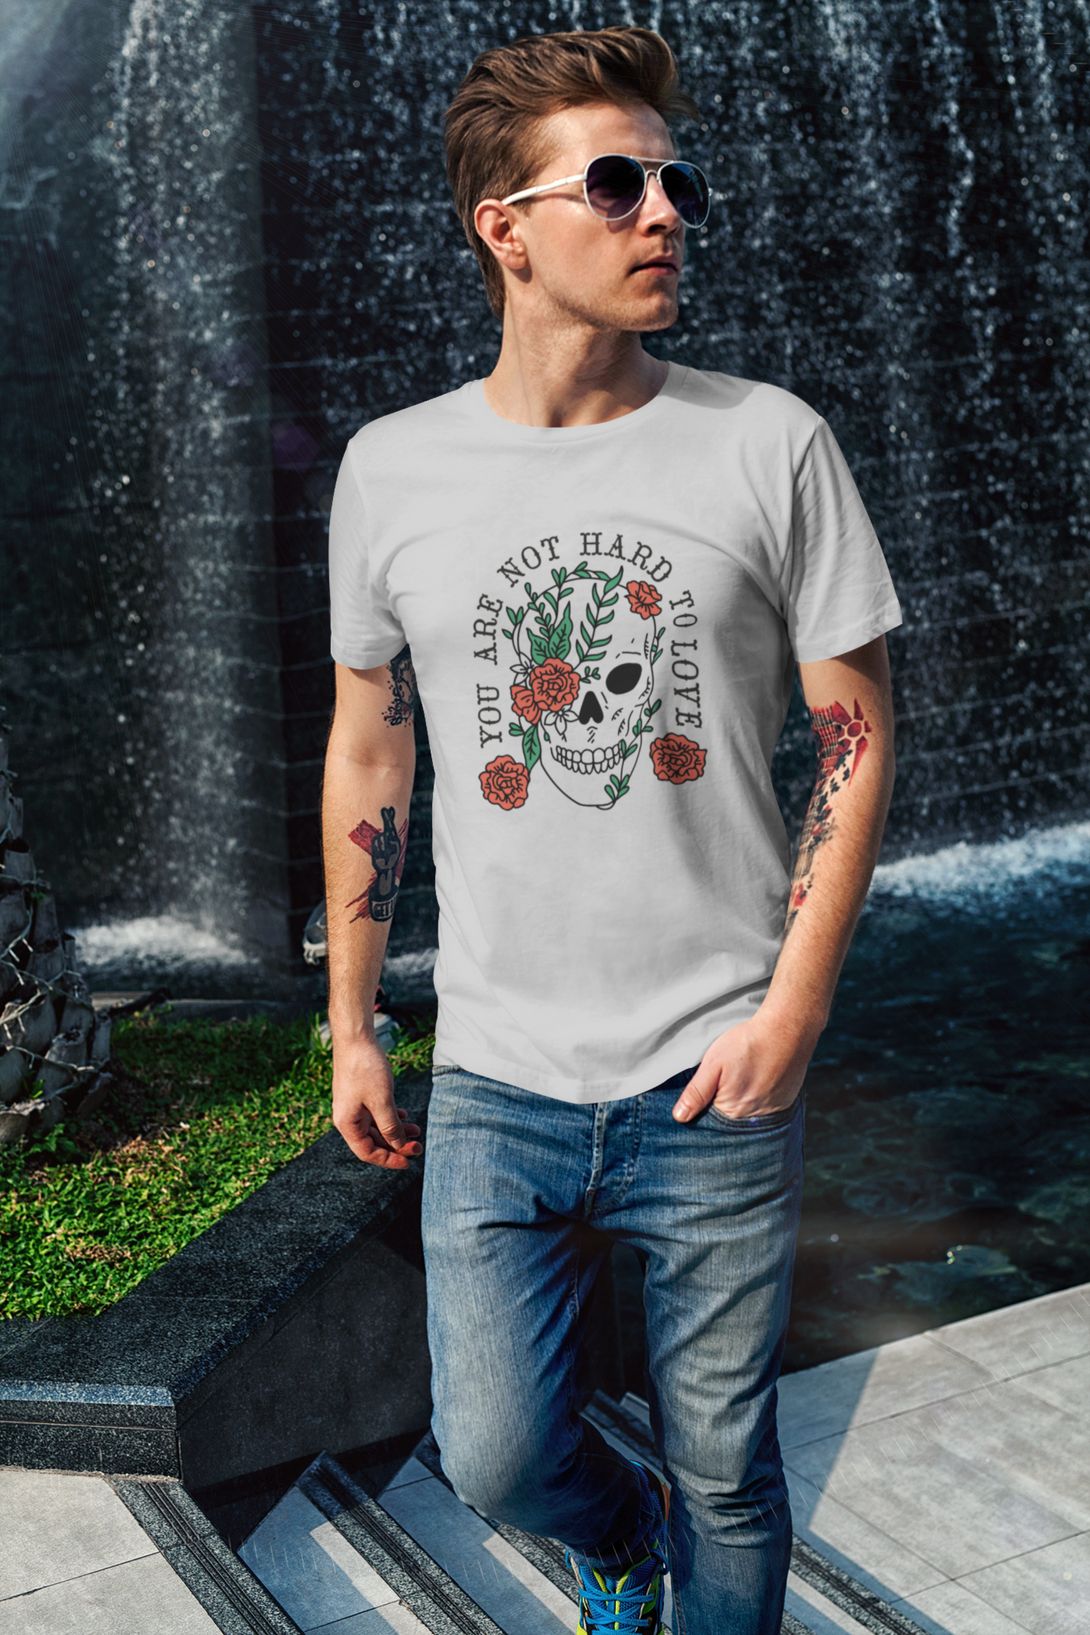 You Are Not Hard To Love Printed T-Shirt For Men - WowWaves - 9